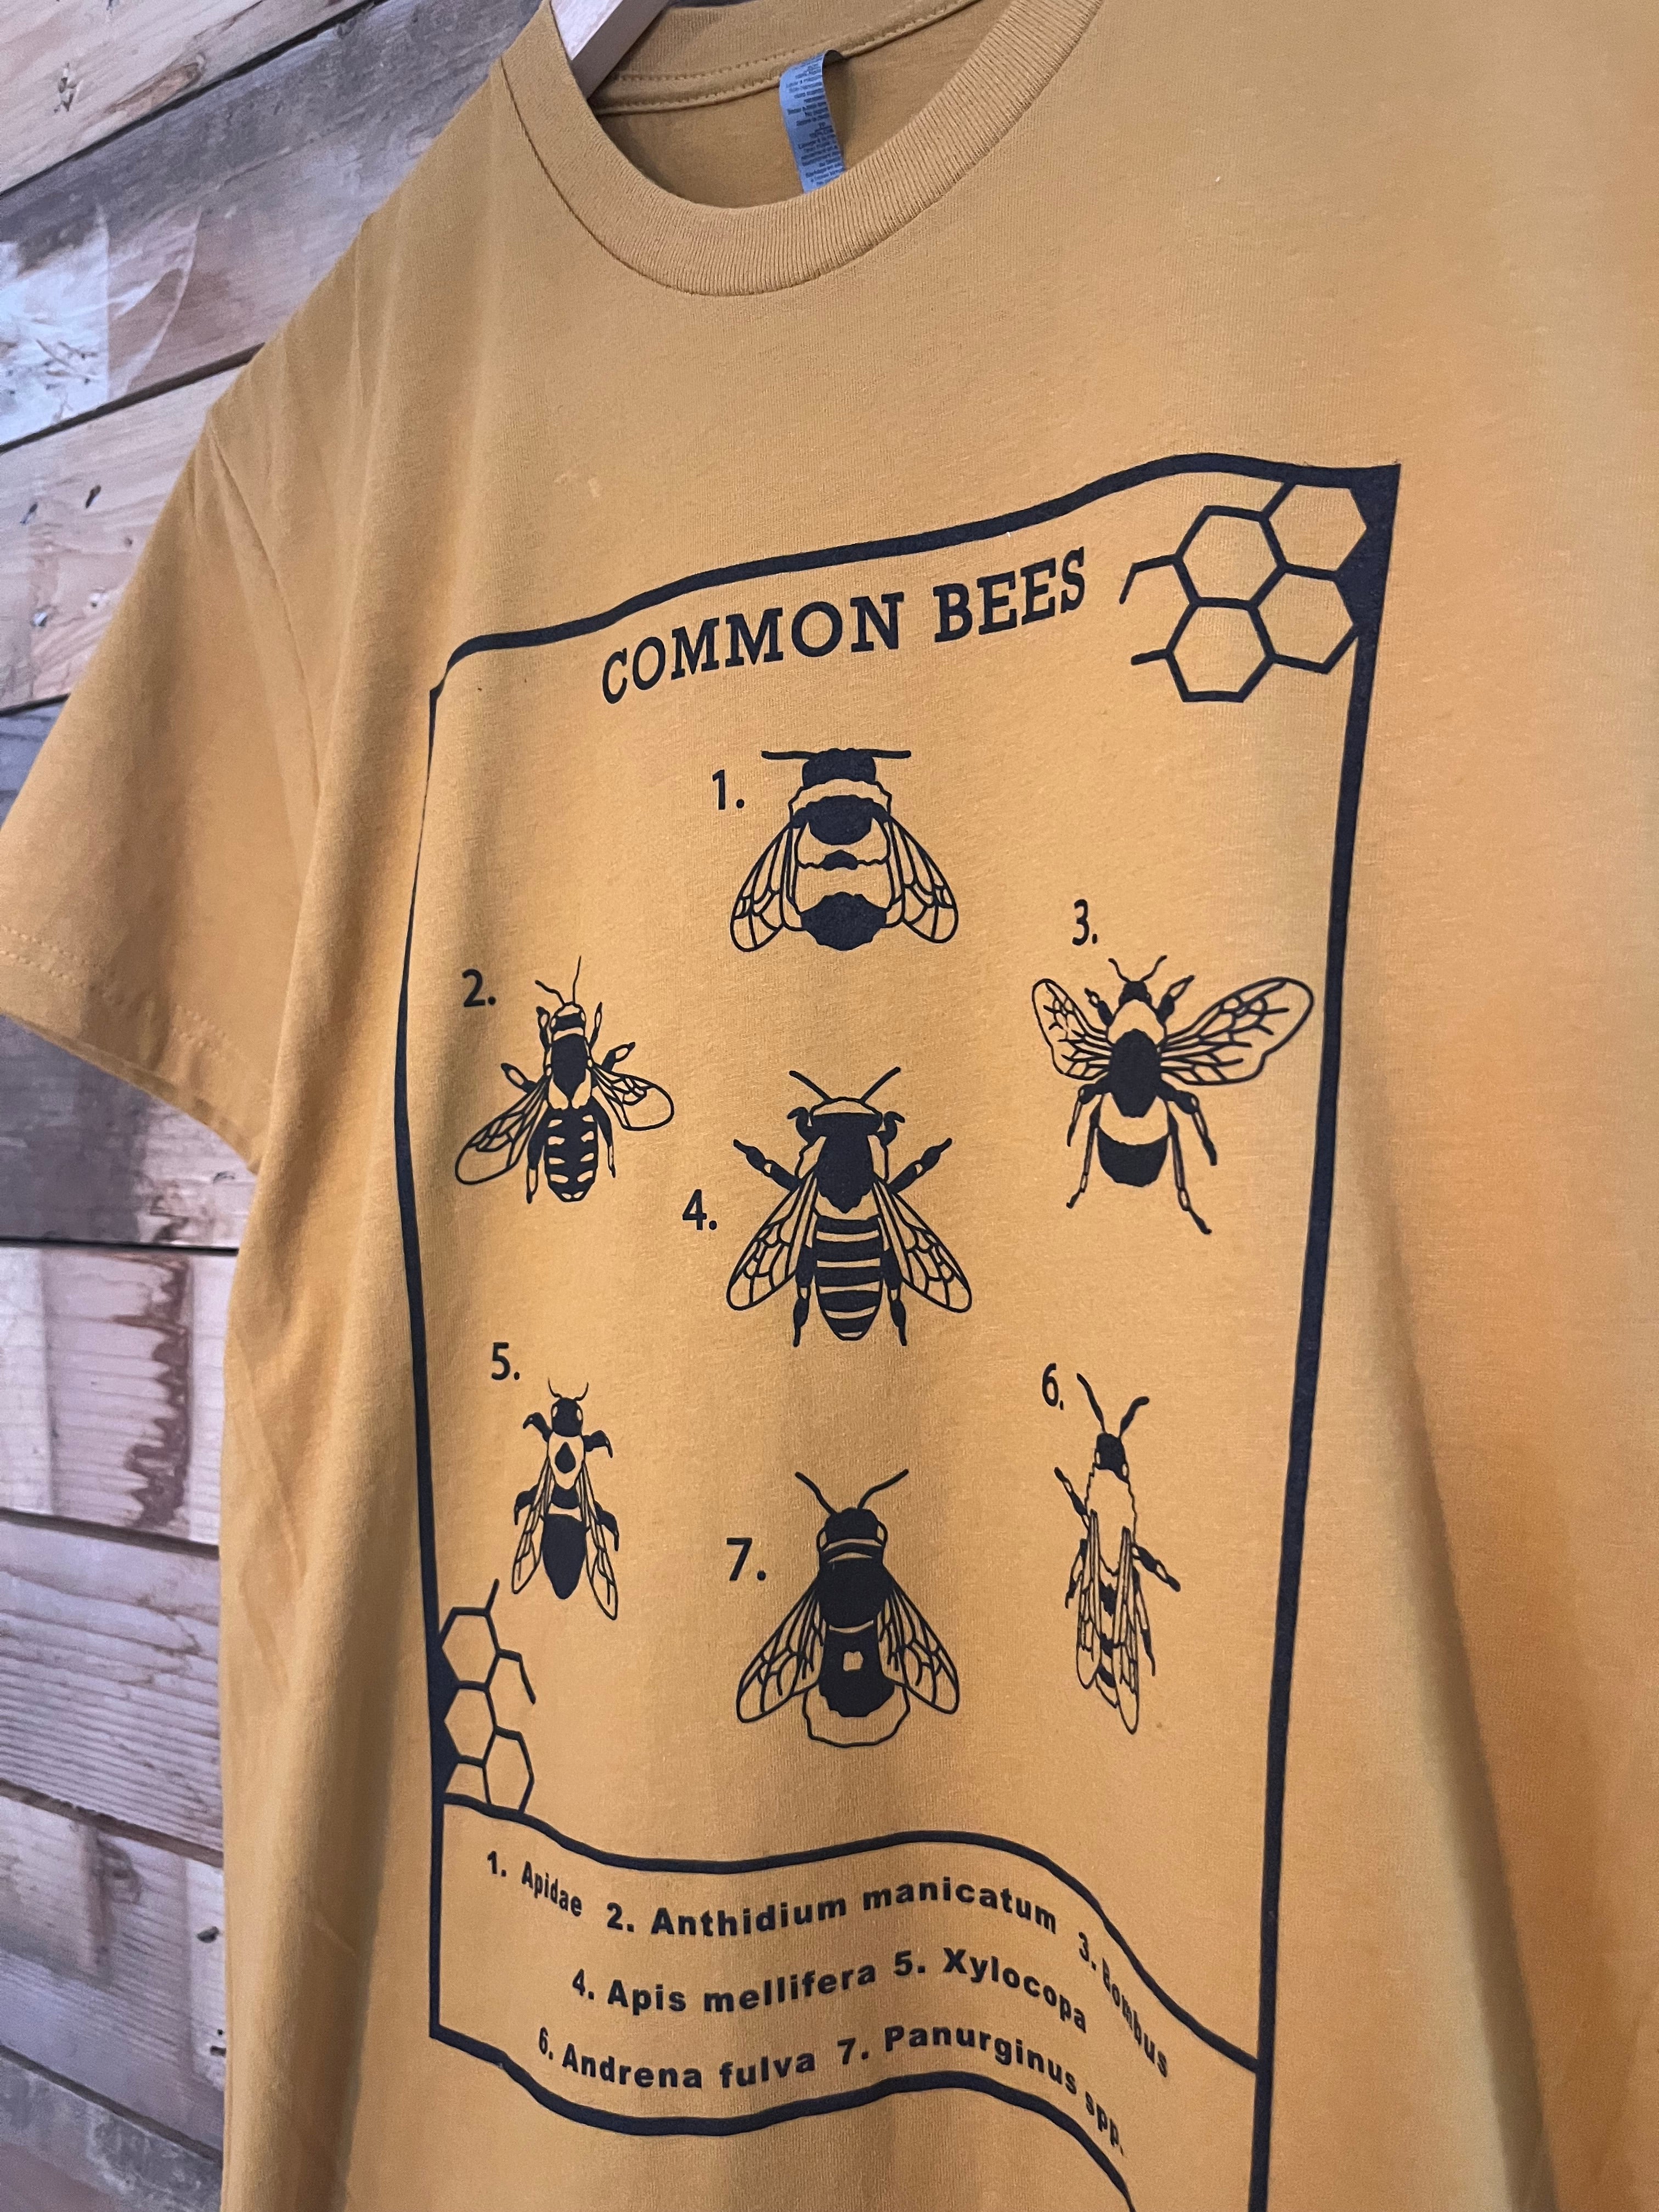 Insectology: Common Bees